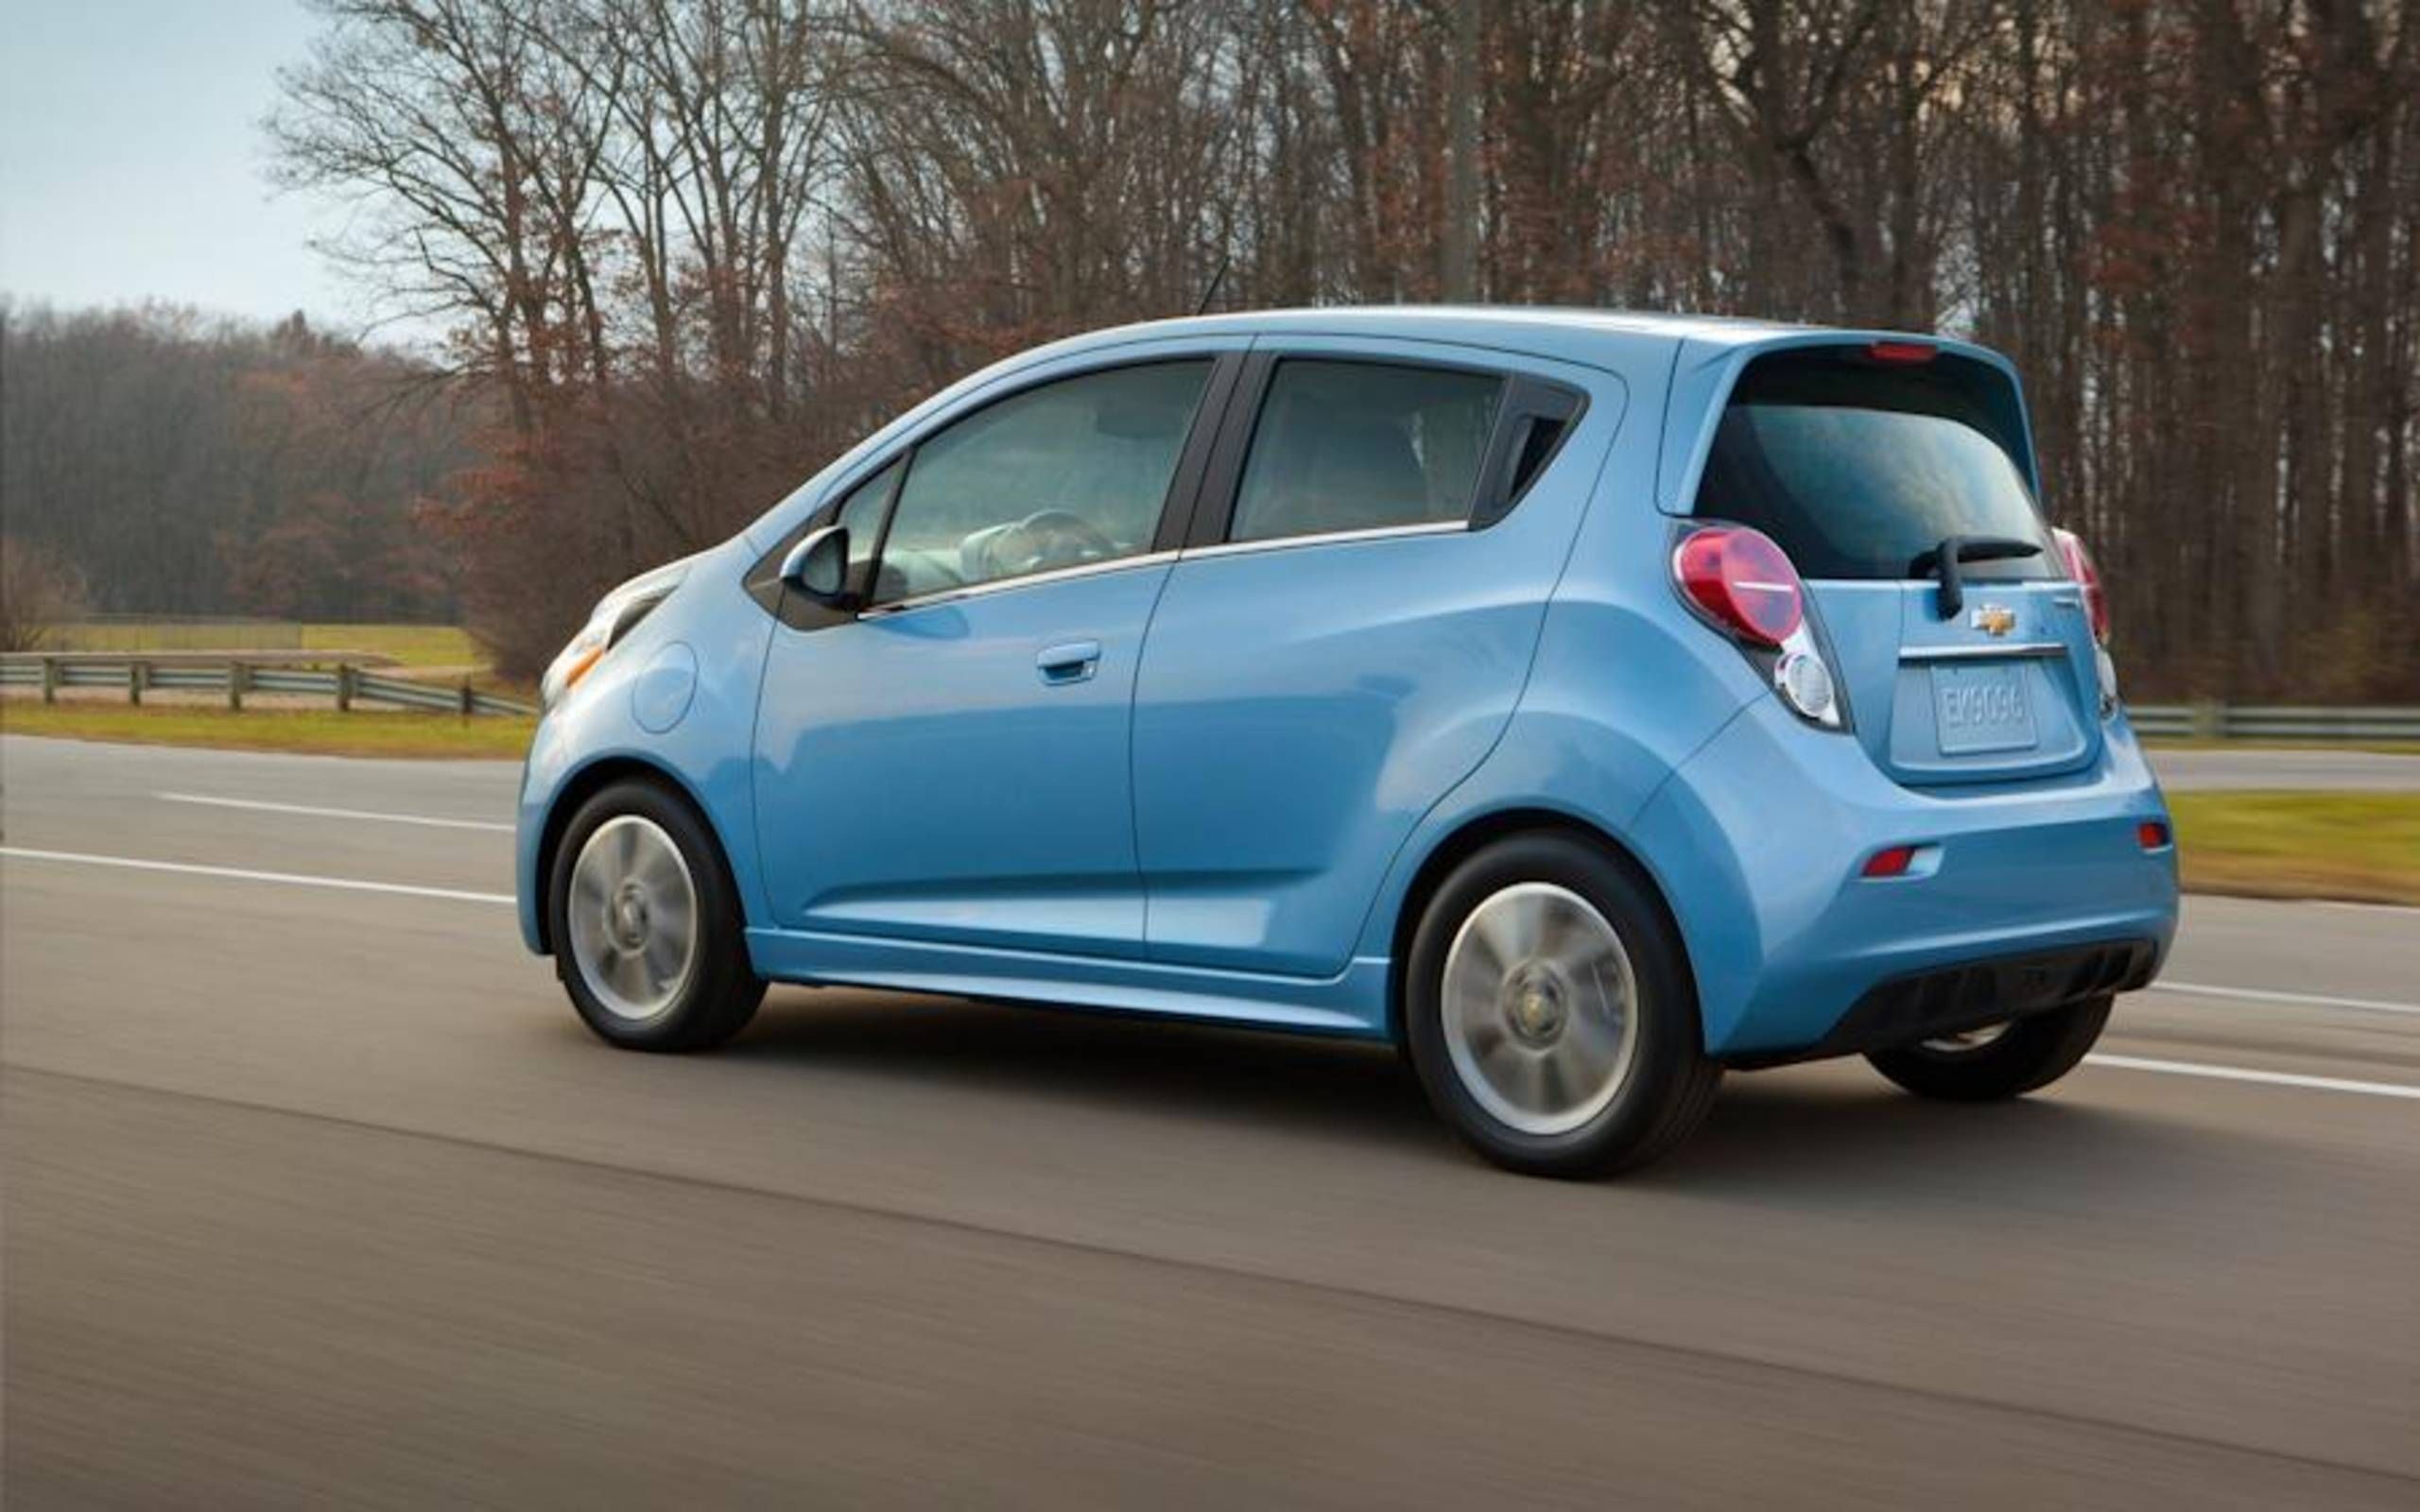 First Drive: Chevrolet's tiny Spark - Los Angeles Times